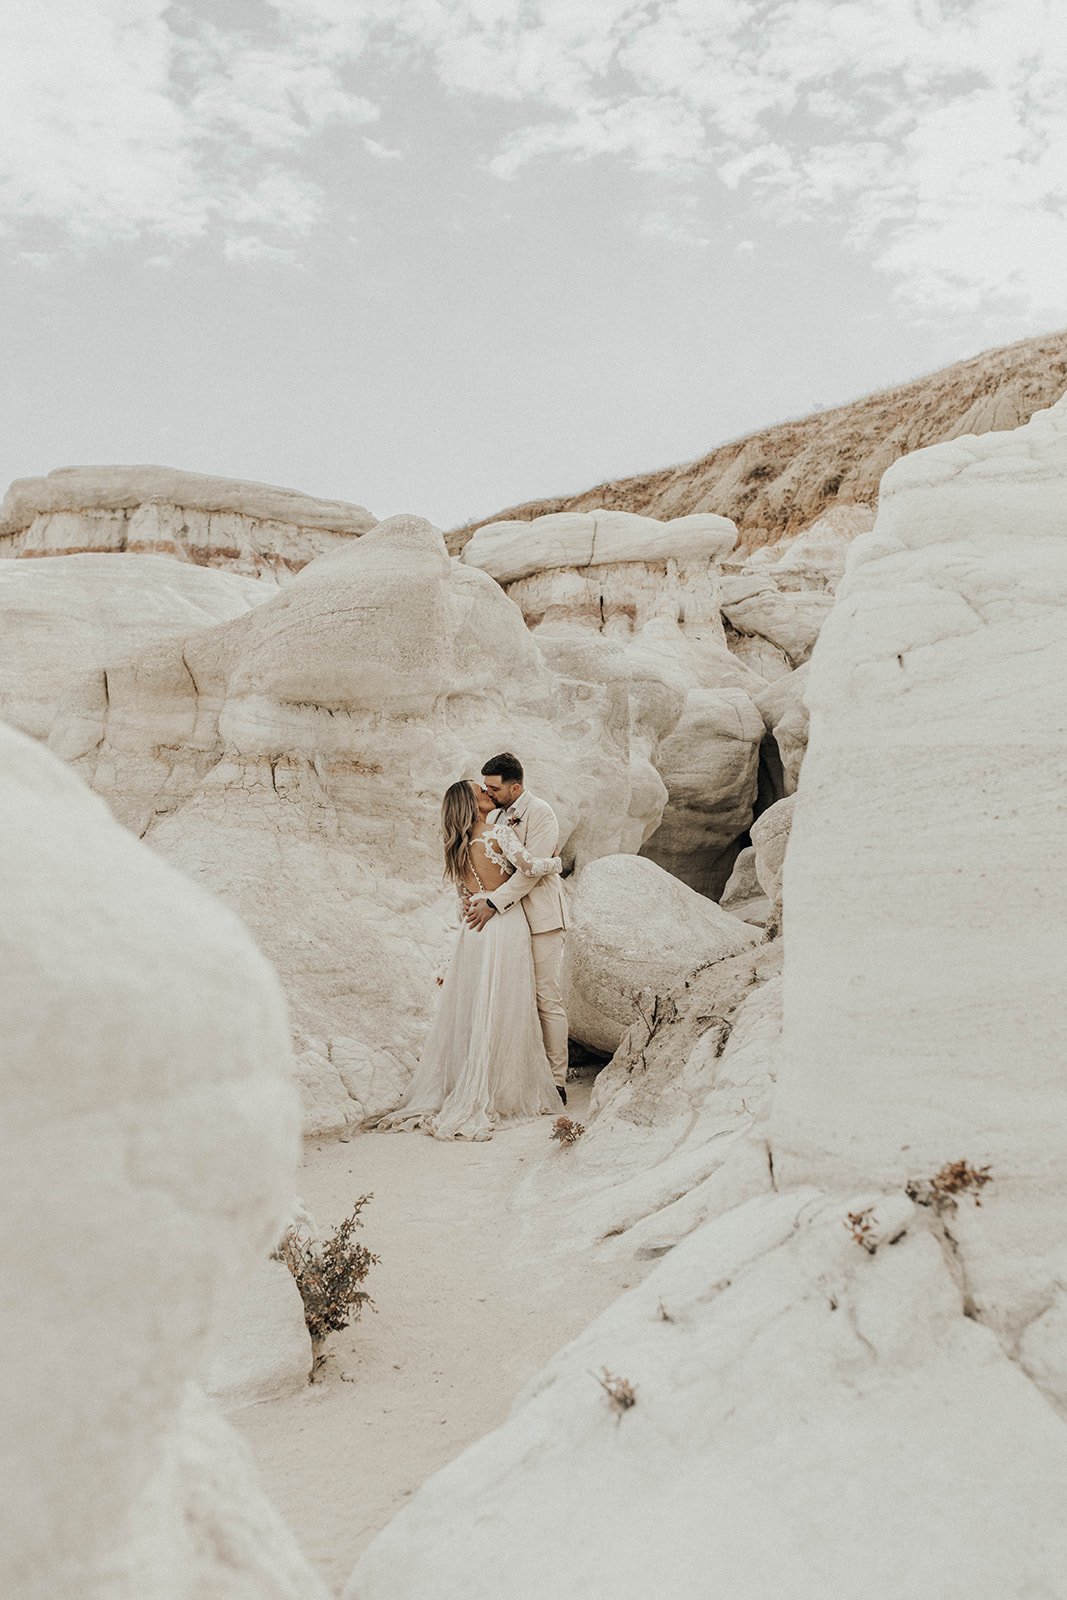 linyage bridal separates - elopement wedding dresses that are packable, hike-able &amp; comfortable for adventure brides and beyond.